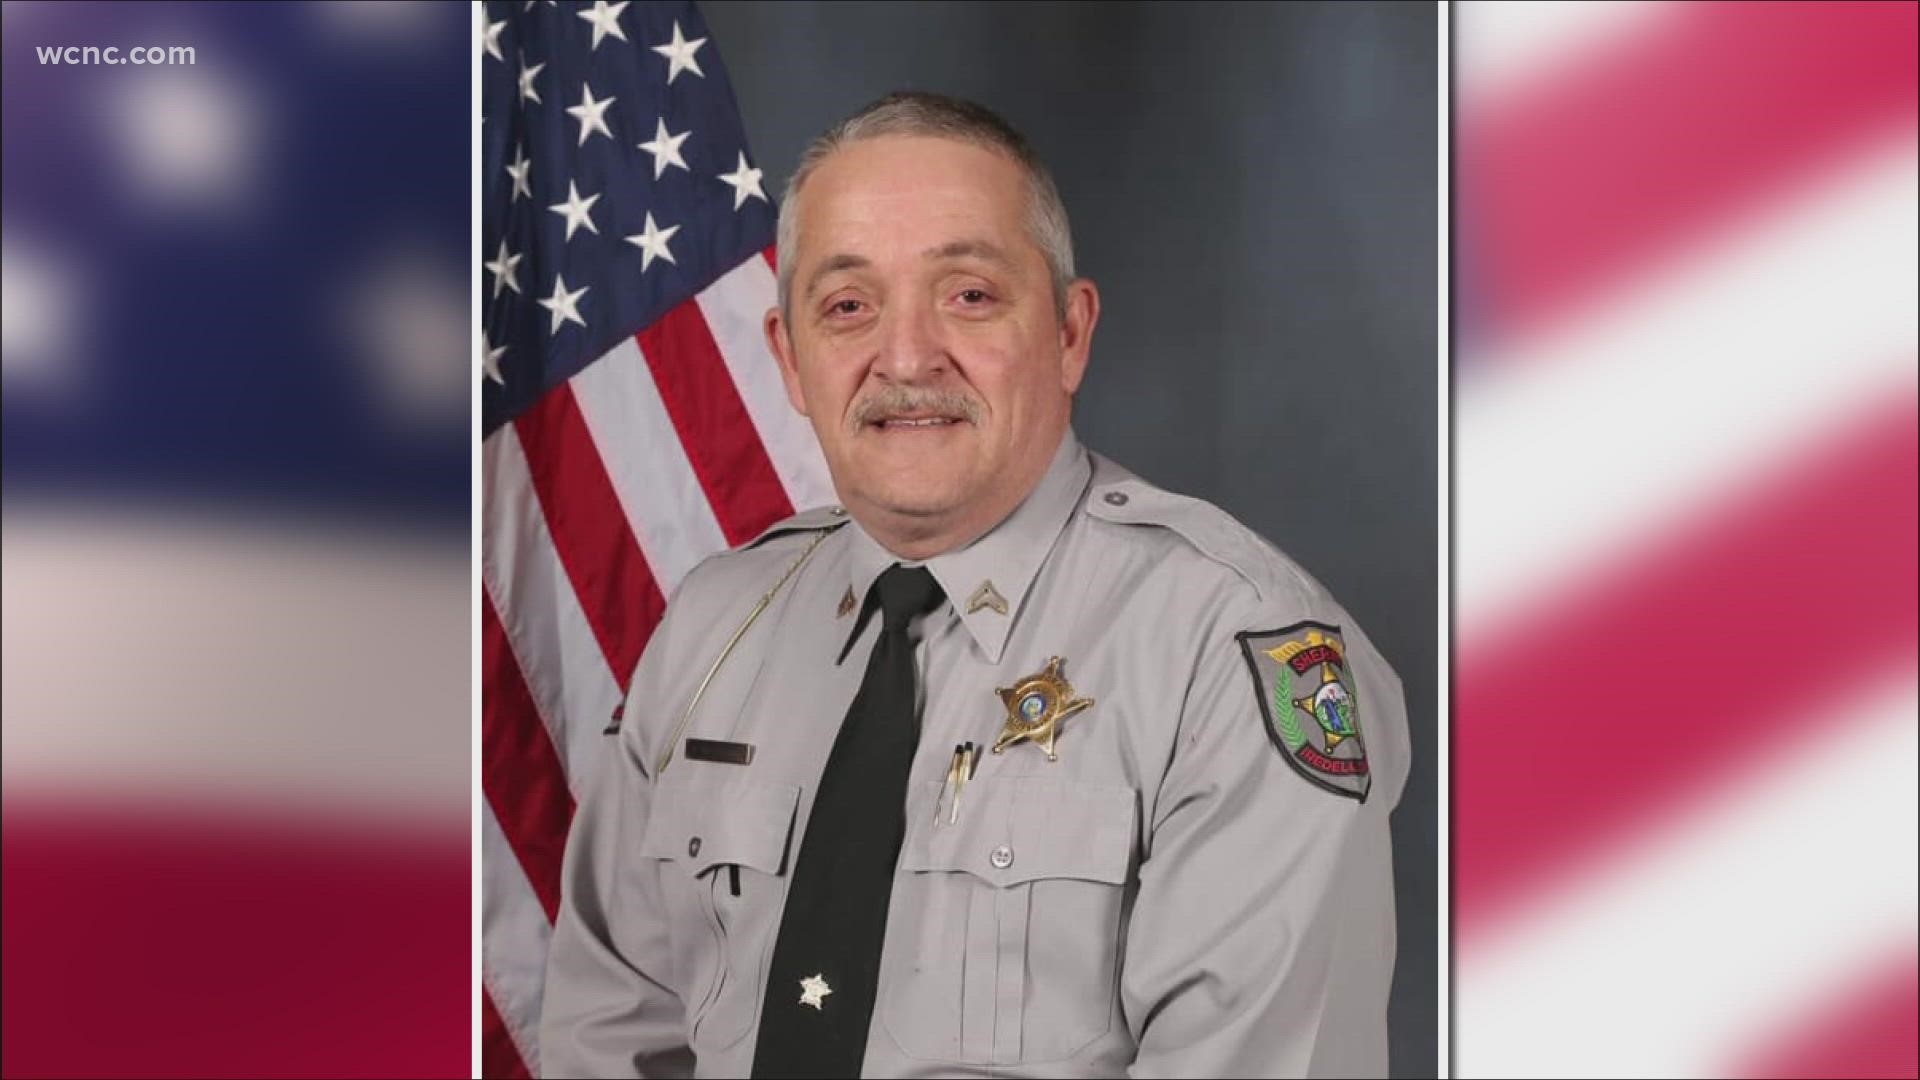 Sergeant Mayhorn had been with the Iredell County Sheriff's office for 18 years.